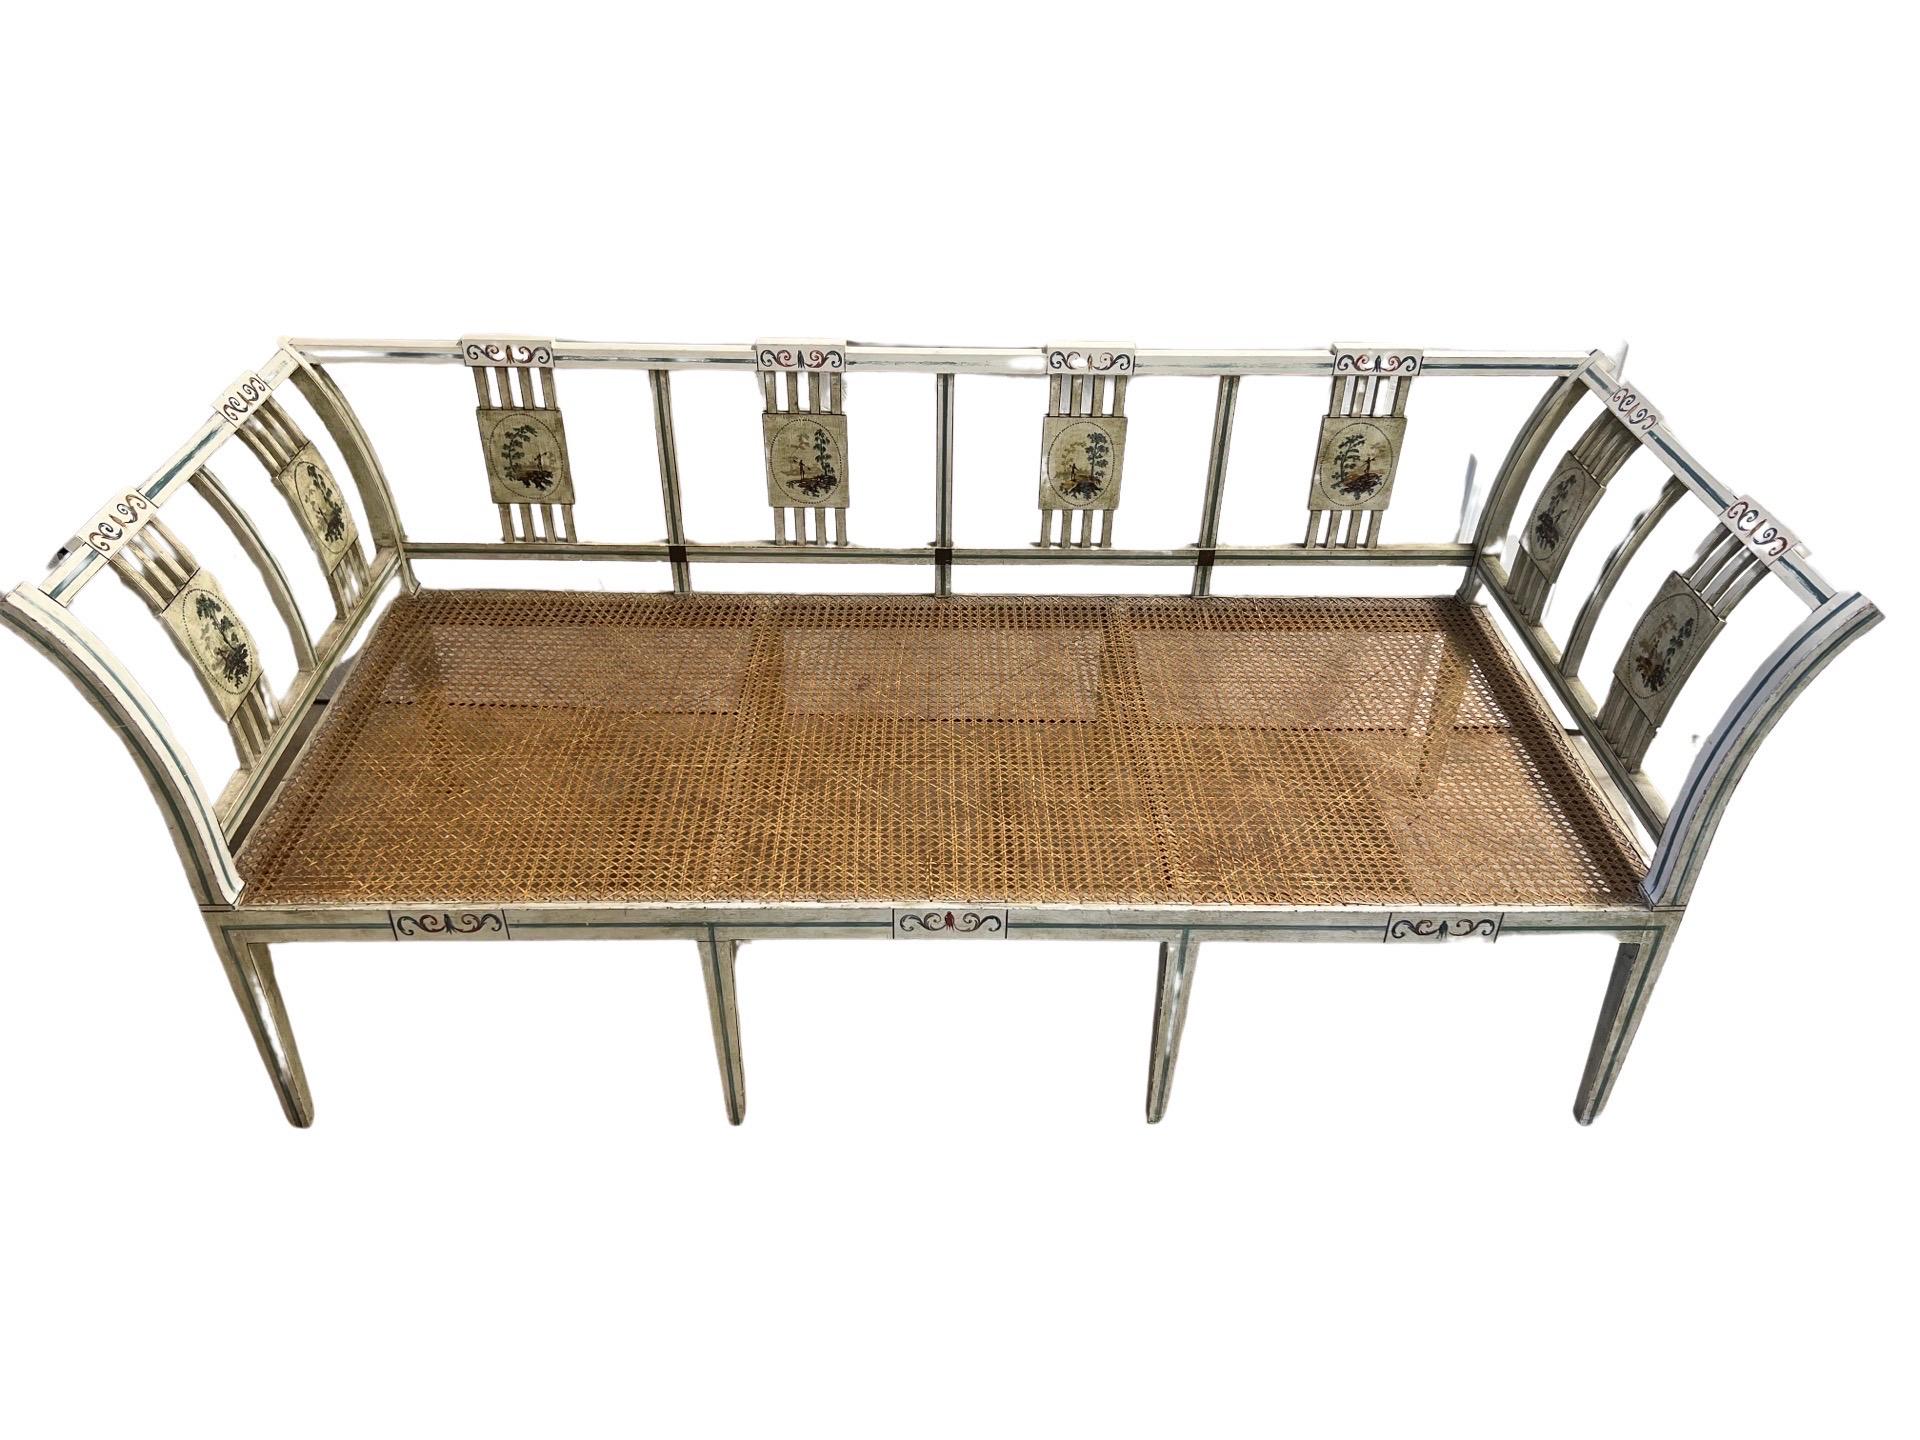 Italian Neoclassical Style Polychrome Decorated Day Bed C. 1940 In Good Condition For Sale In Atlanta, GA